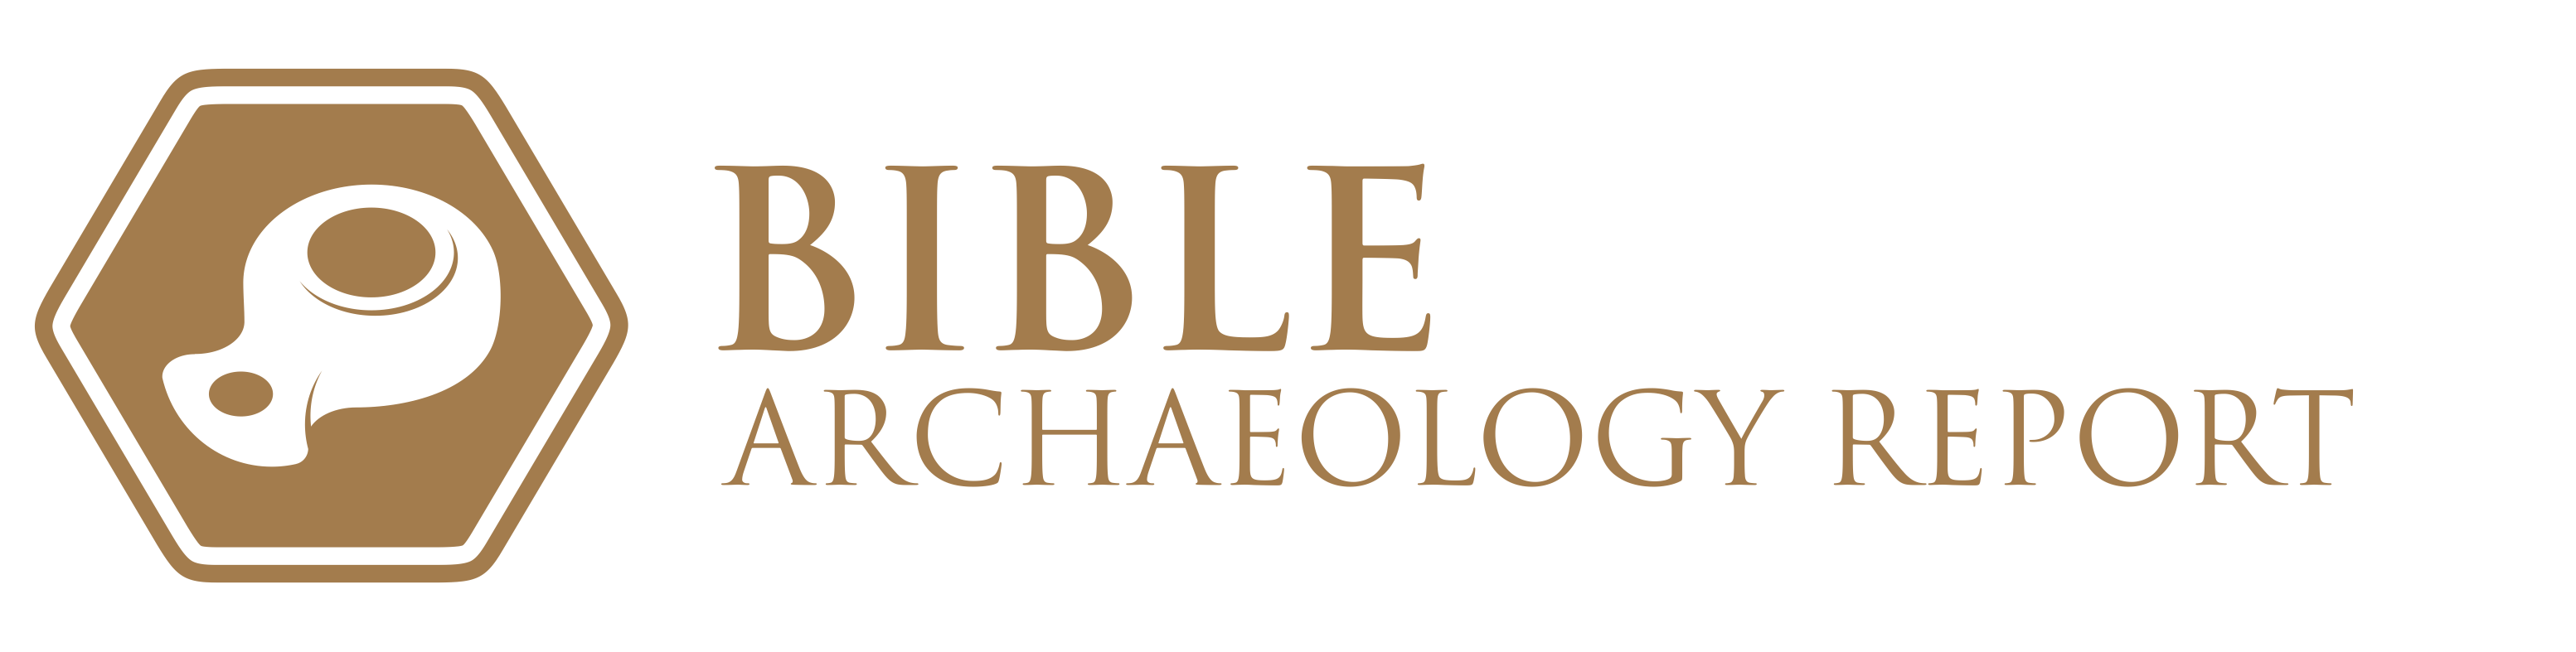 Bible Archaeology Report